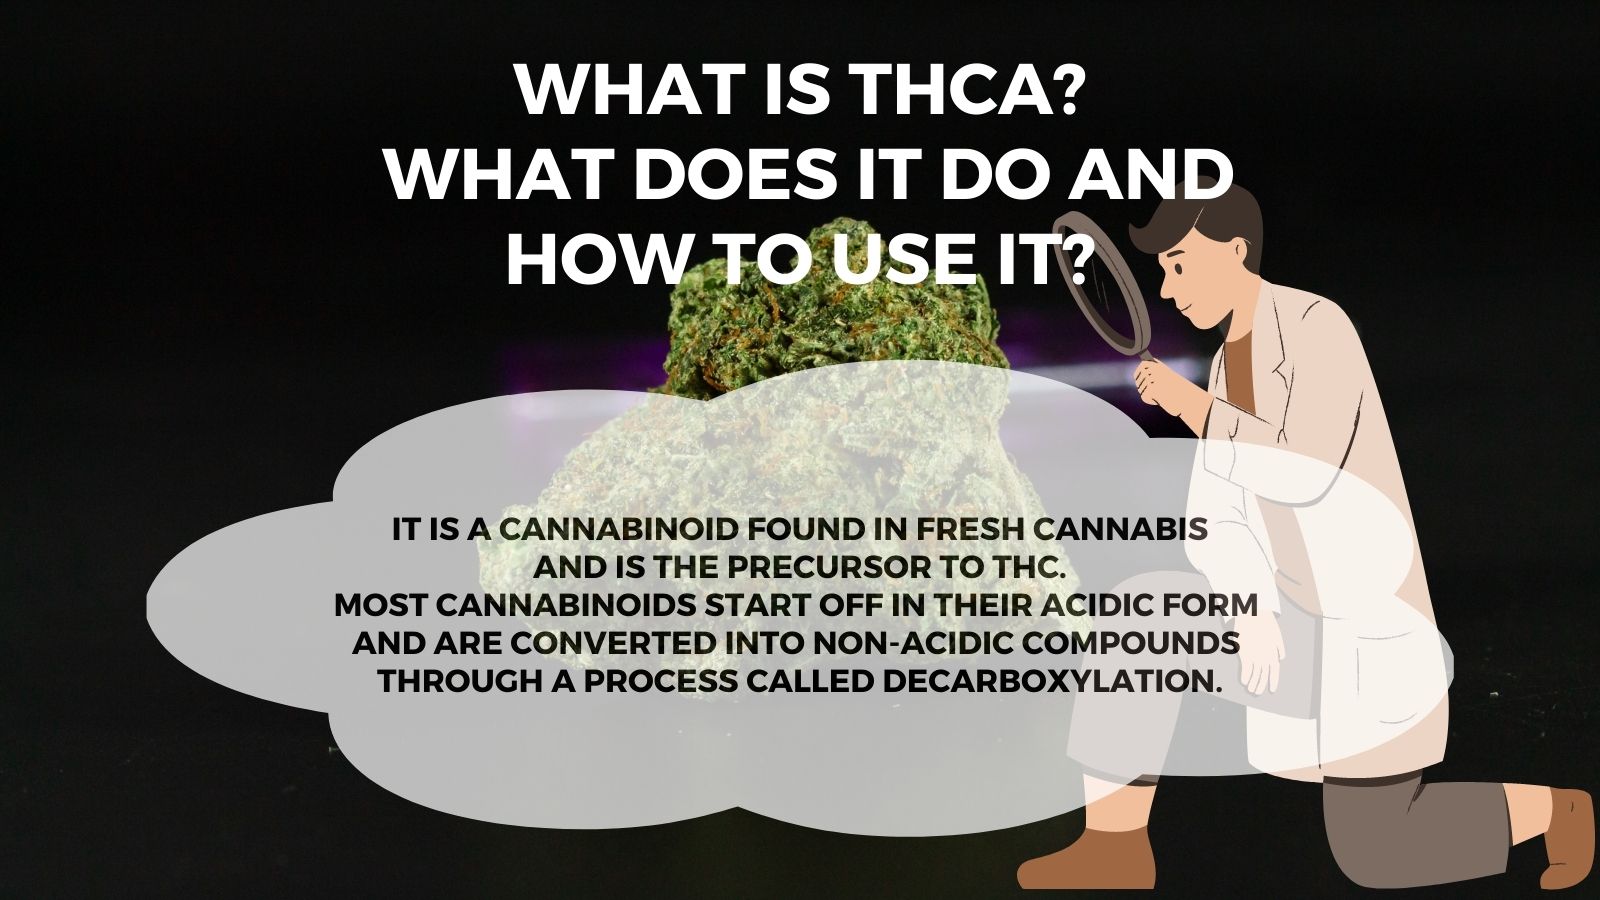 What is THCA and What does it do and how to use it